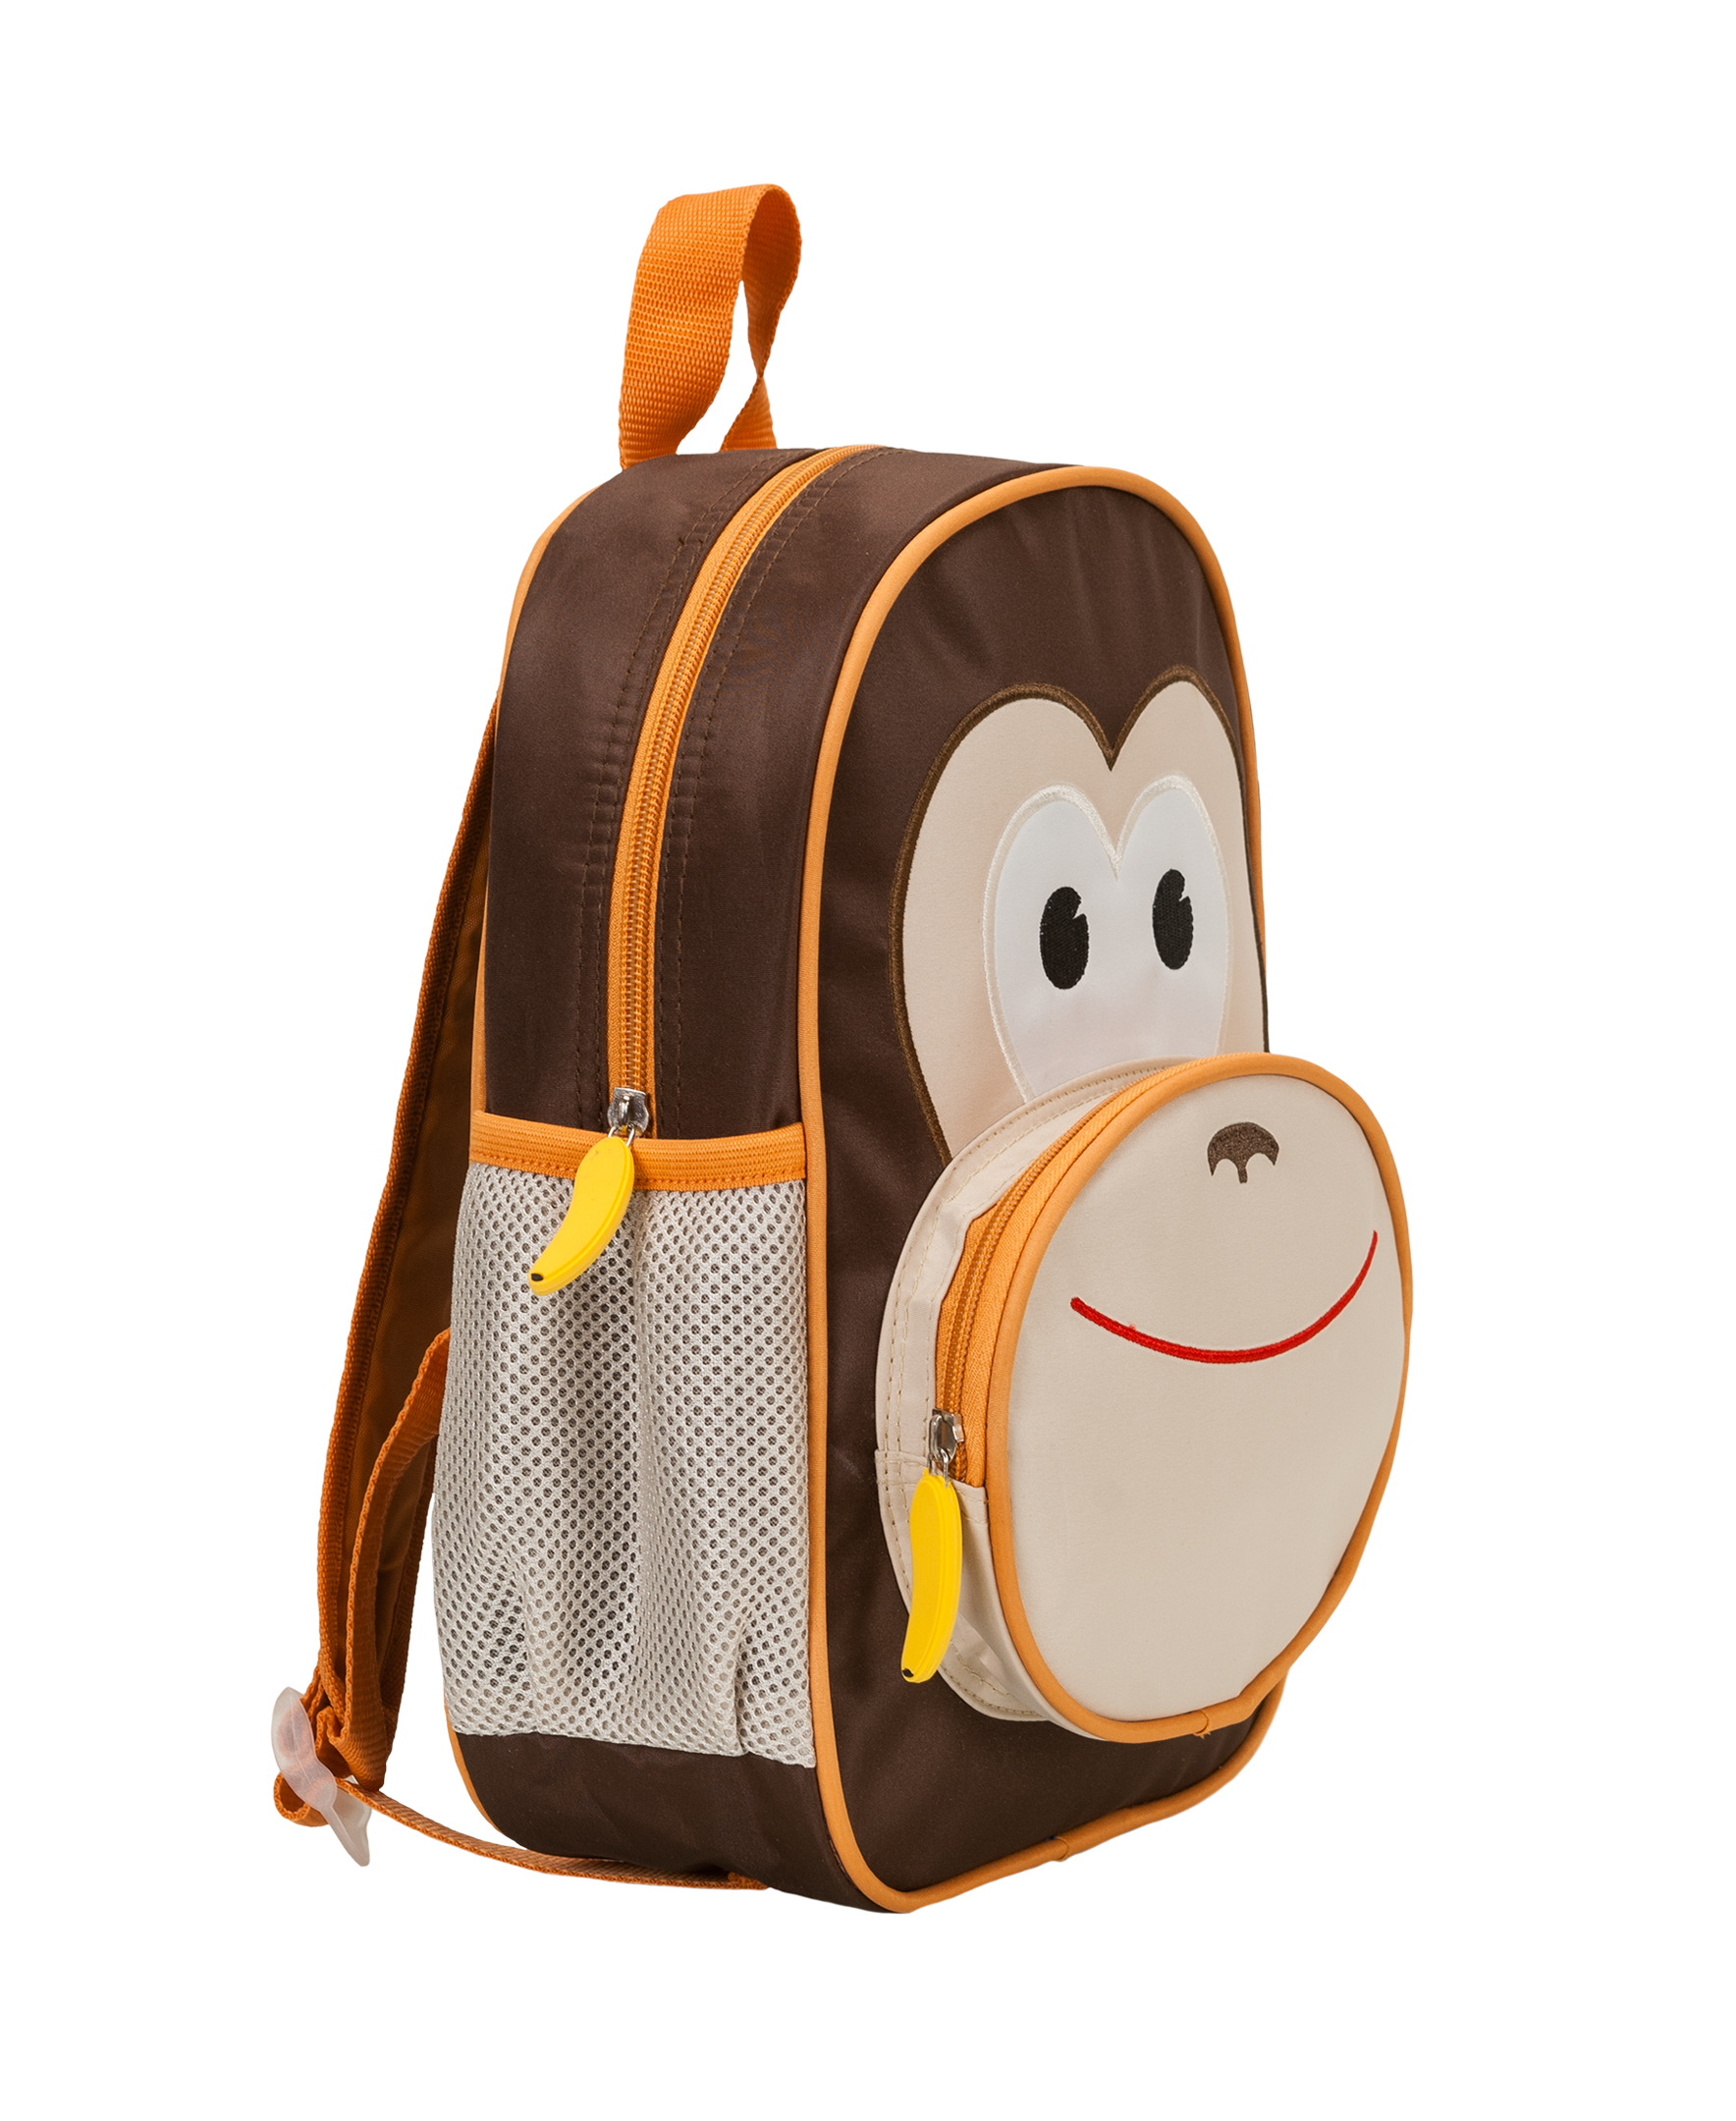 Rockland Luggage "My First Backpack" Kids Backpack - image 5 of 8